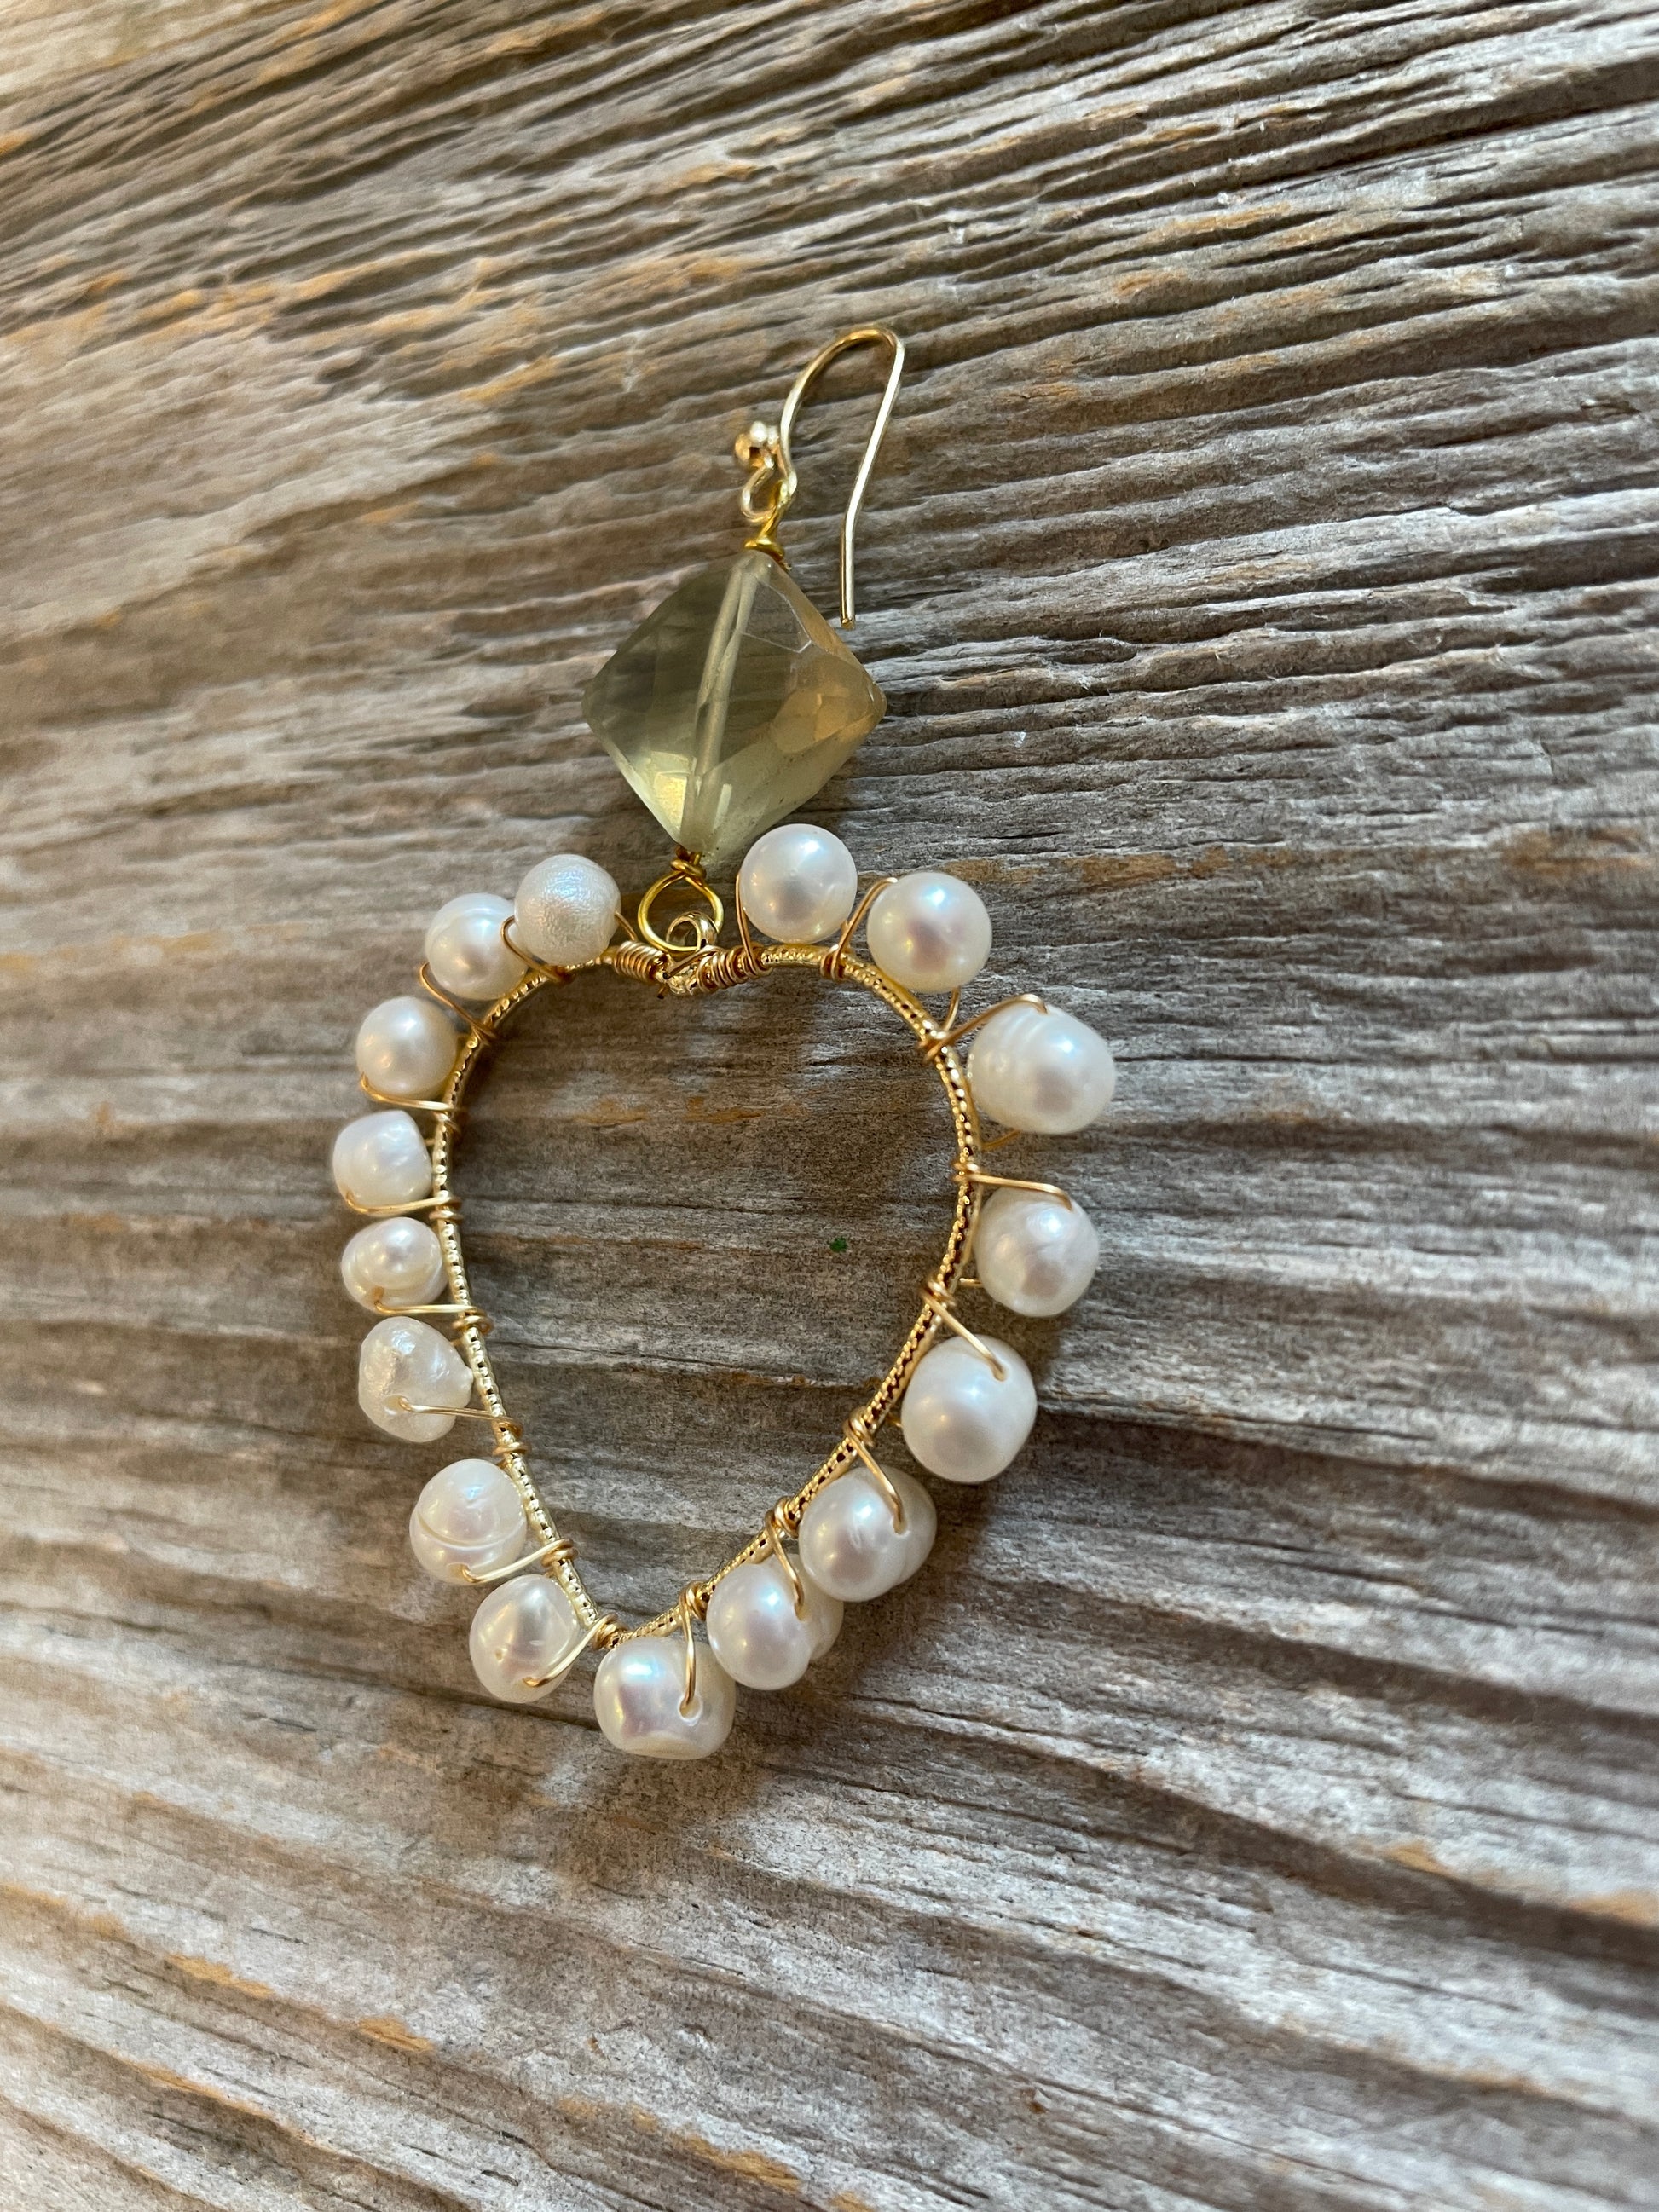 Handmade Gold drop hearts with pearl detail with faceted semi precious lemon quartz